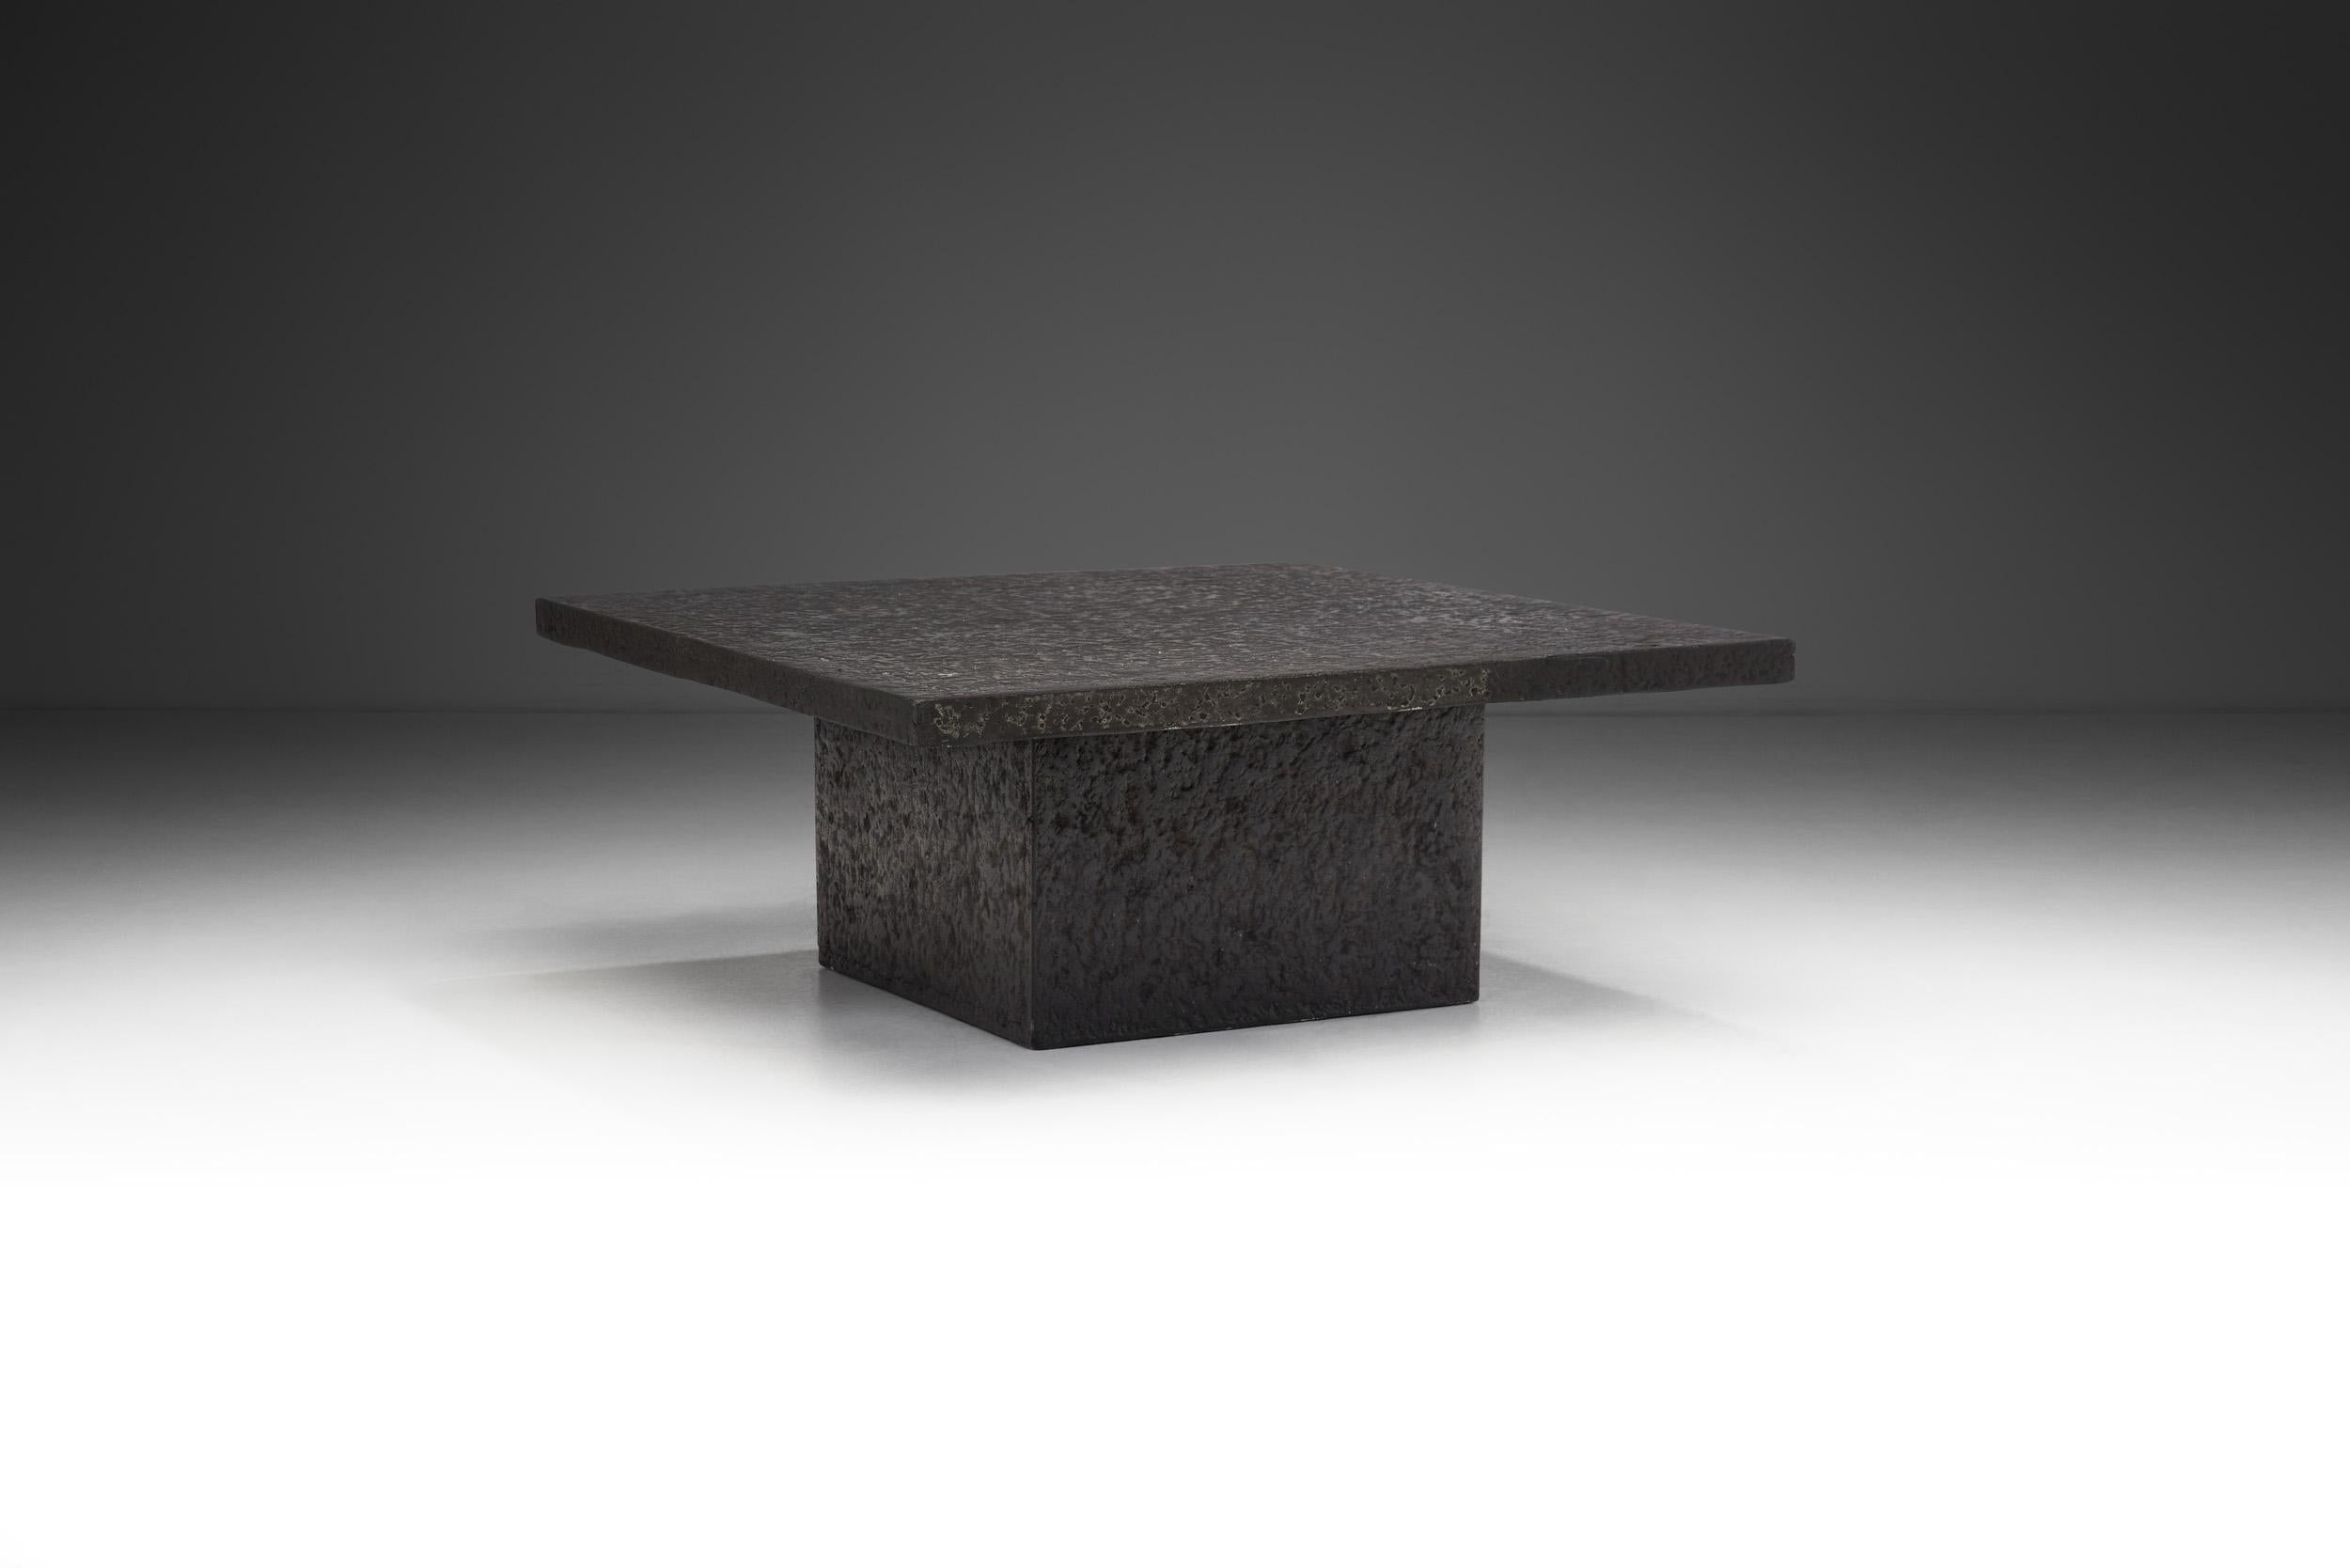 The essence of Brutalism, an architectural movement originating in the mid-20th century, is captured in the un-embellished design of this coffee table. It proudly showcases raw, bold geometric forms, and a prioritization of function over adornment.